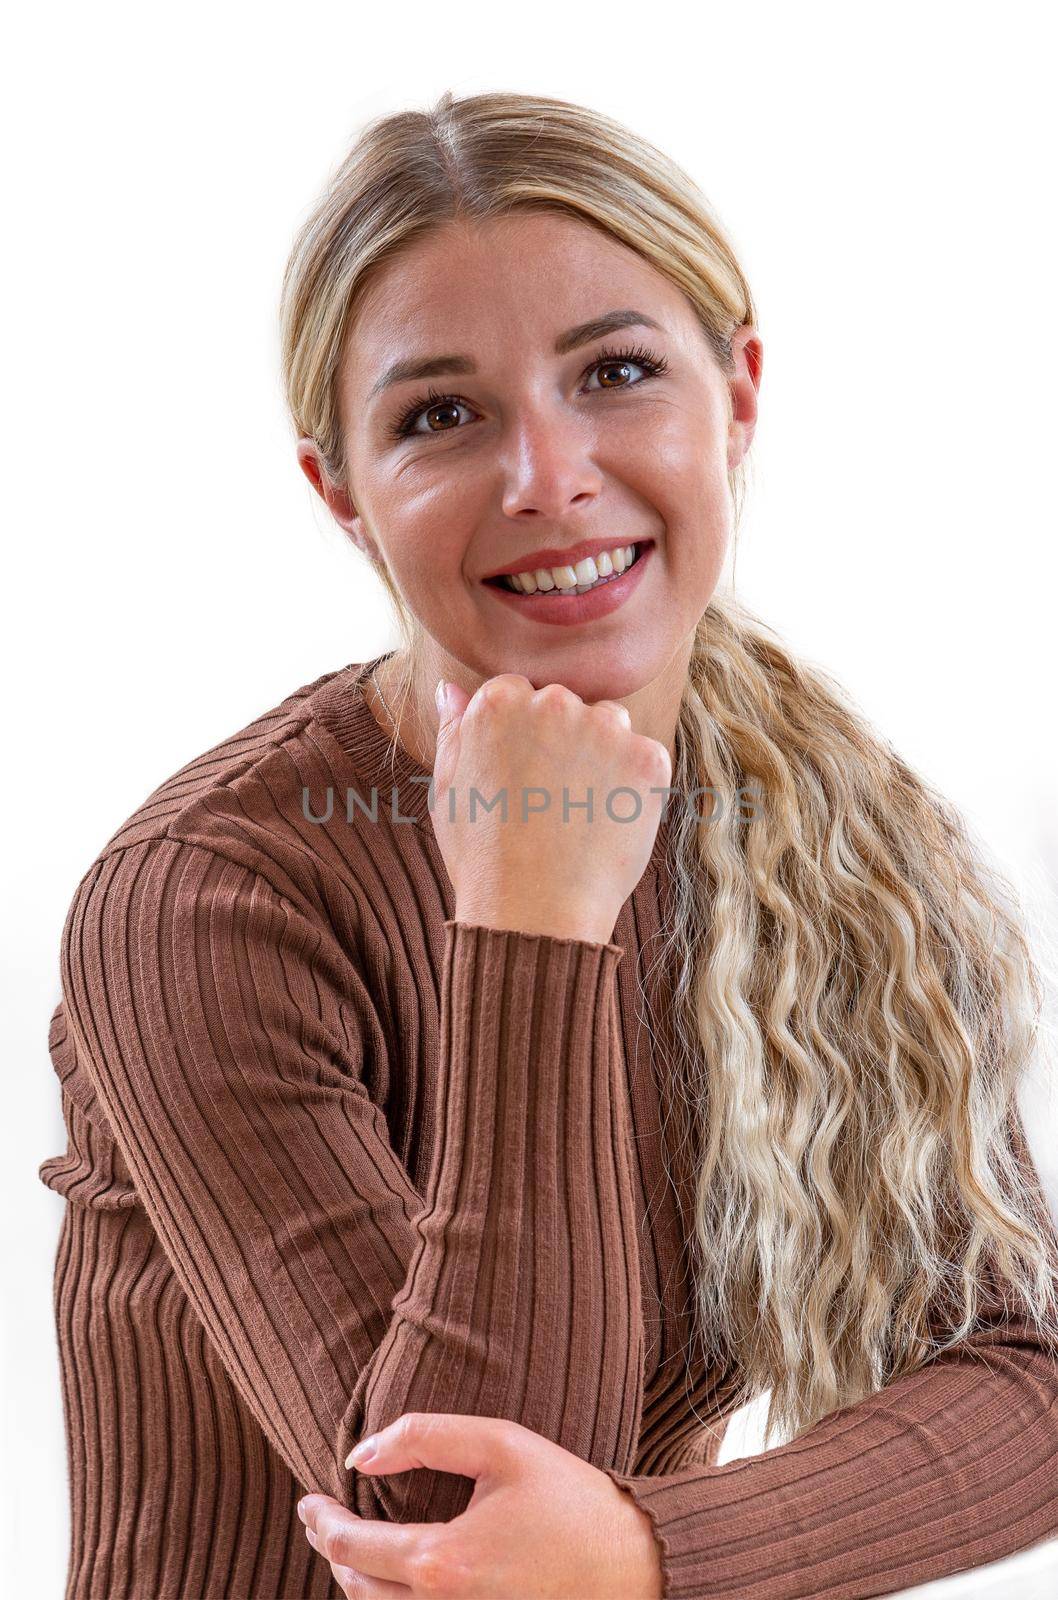 From the front, smiling leaning on the elbow on a cropped white background.